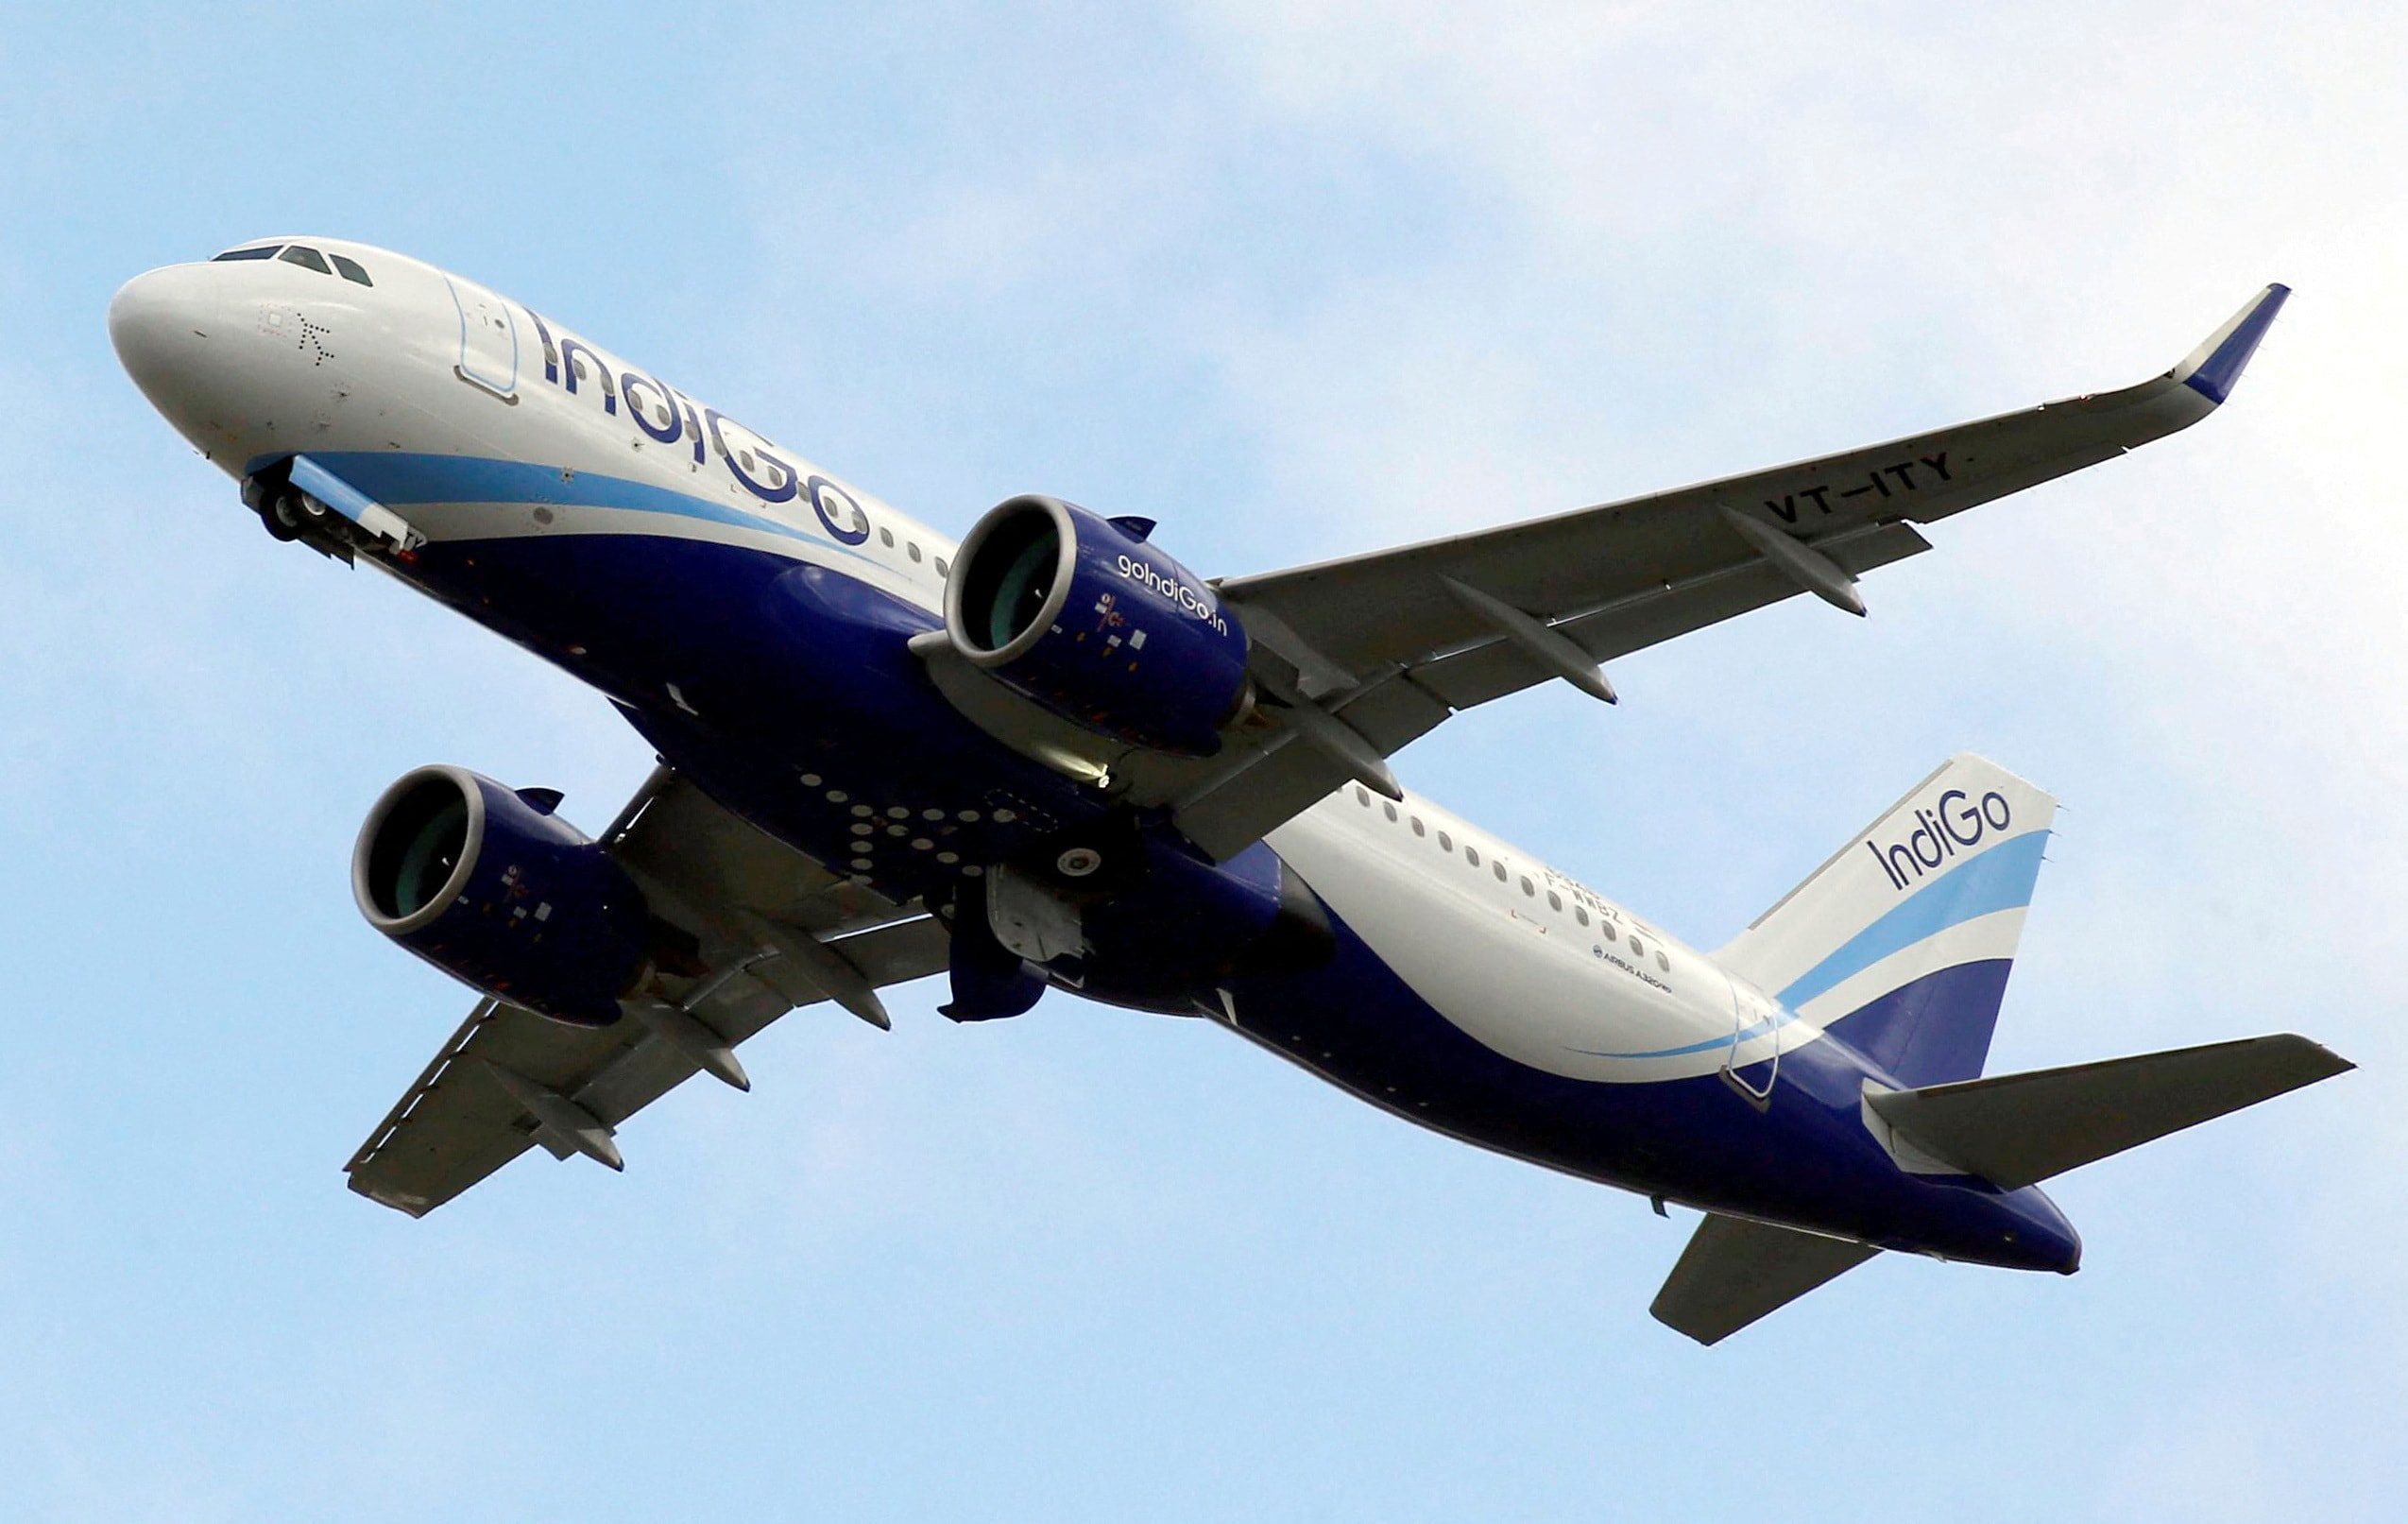 Man Claims IndiGo Flight Landed With 2 Minutes Of Fuel Left, Airline Denies